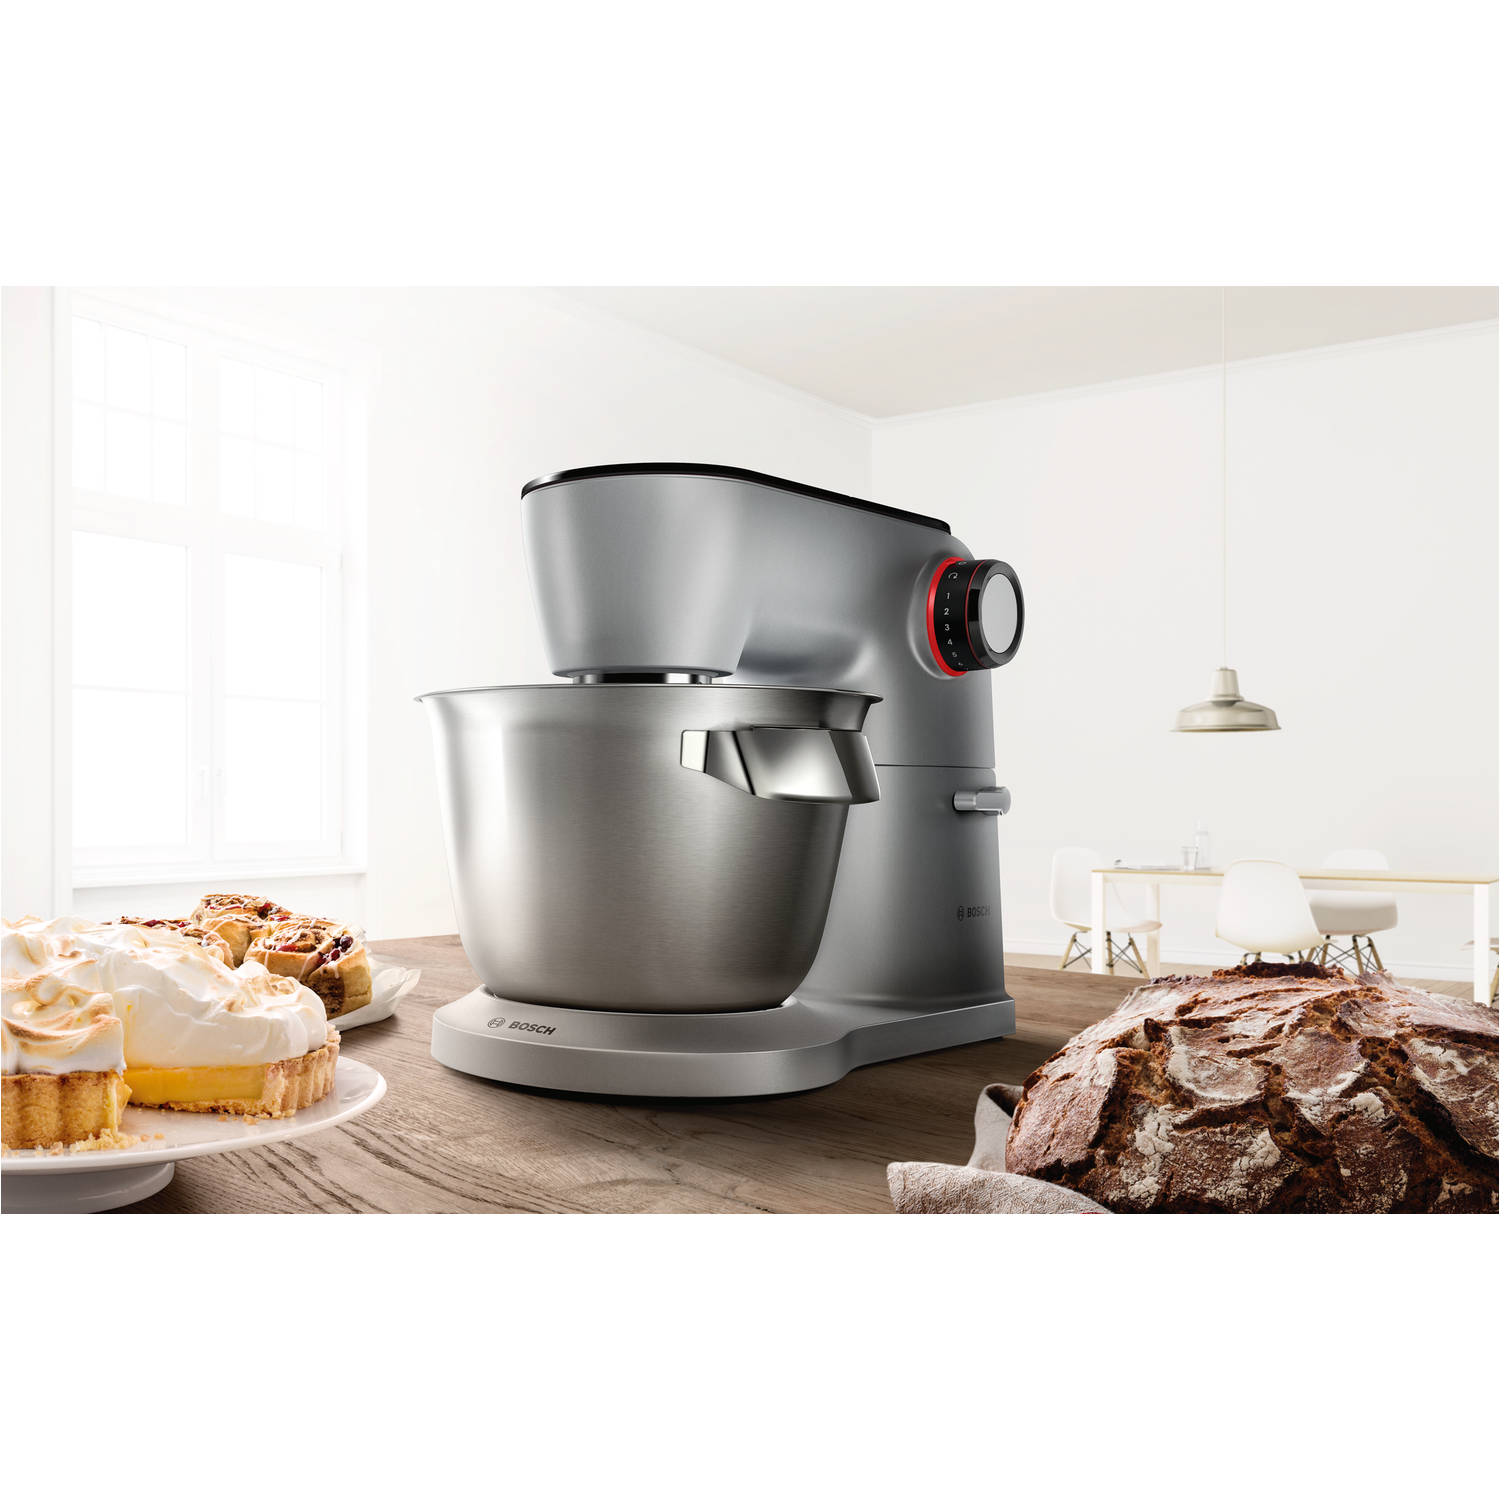 Bosch stand mixer, TV & Home Appliances, Kitchen Appliances, Hand & Stand  Mixers on Carousell